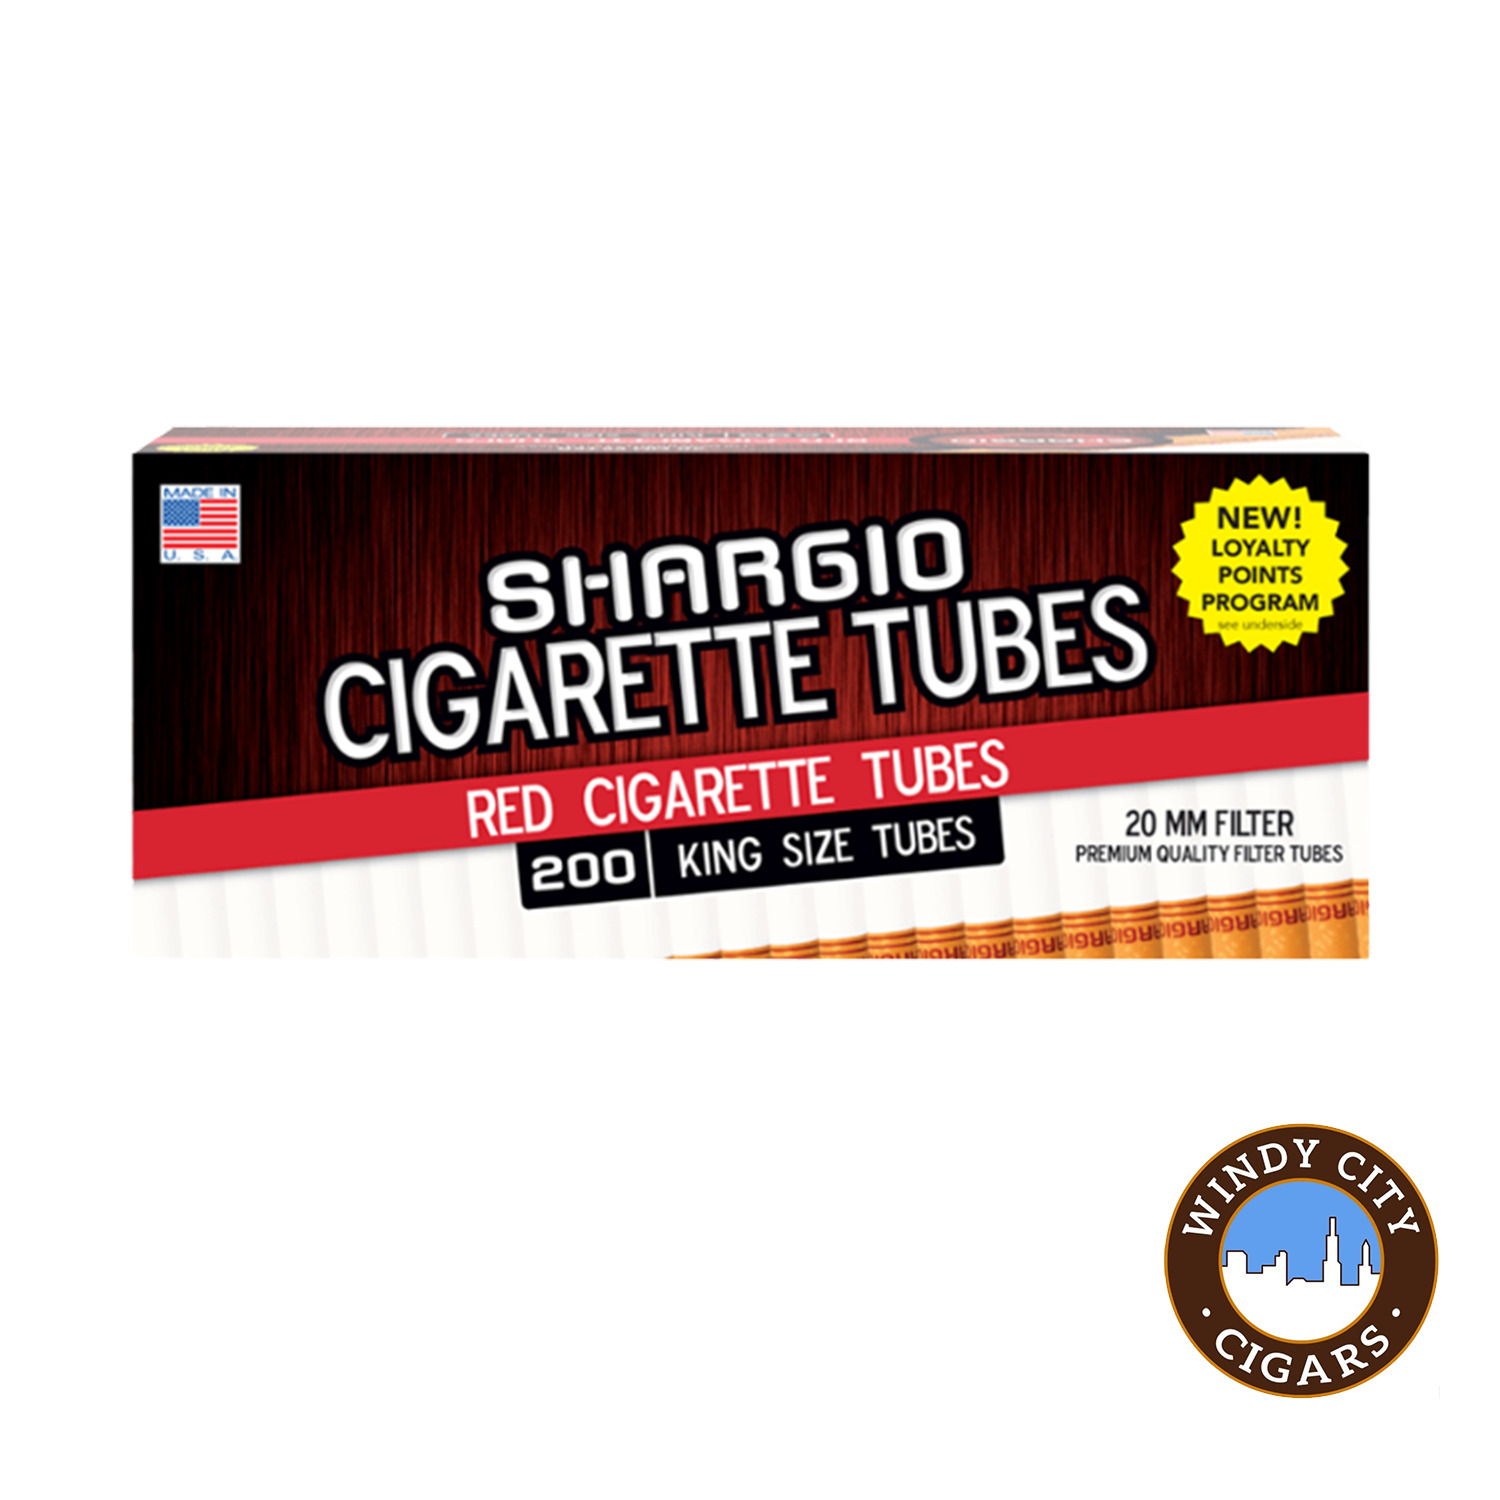 Shargio Red King Cigarette 200ct Tubes - 10 Boxes